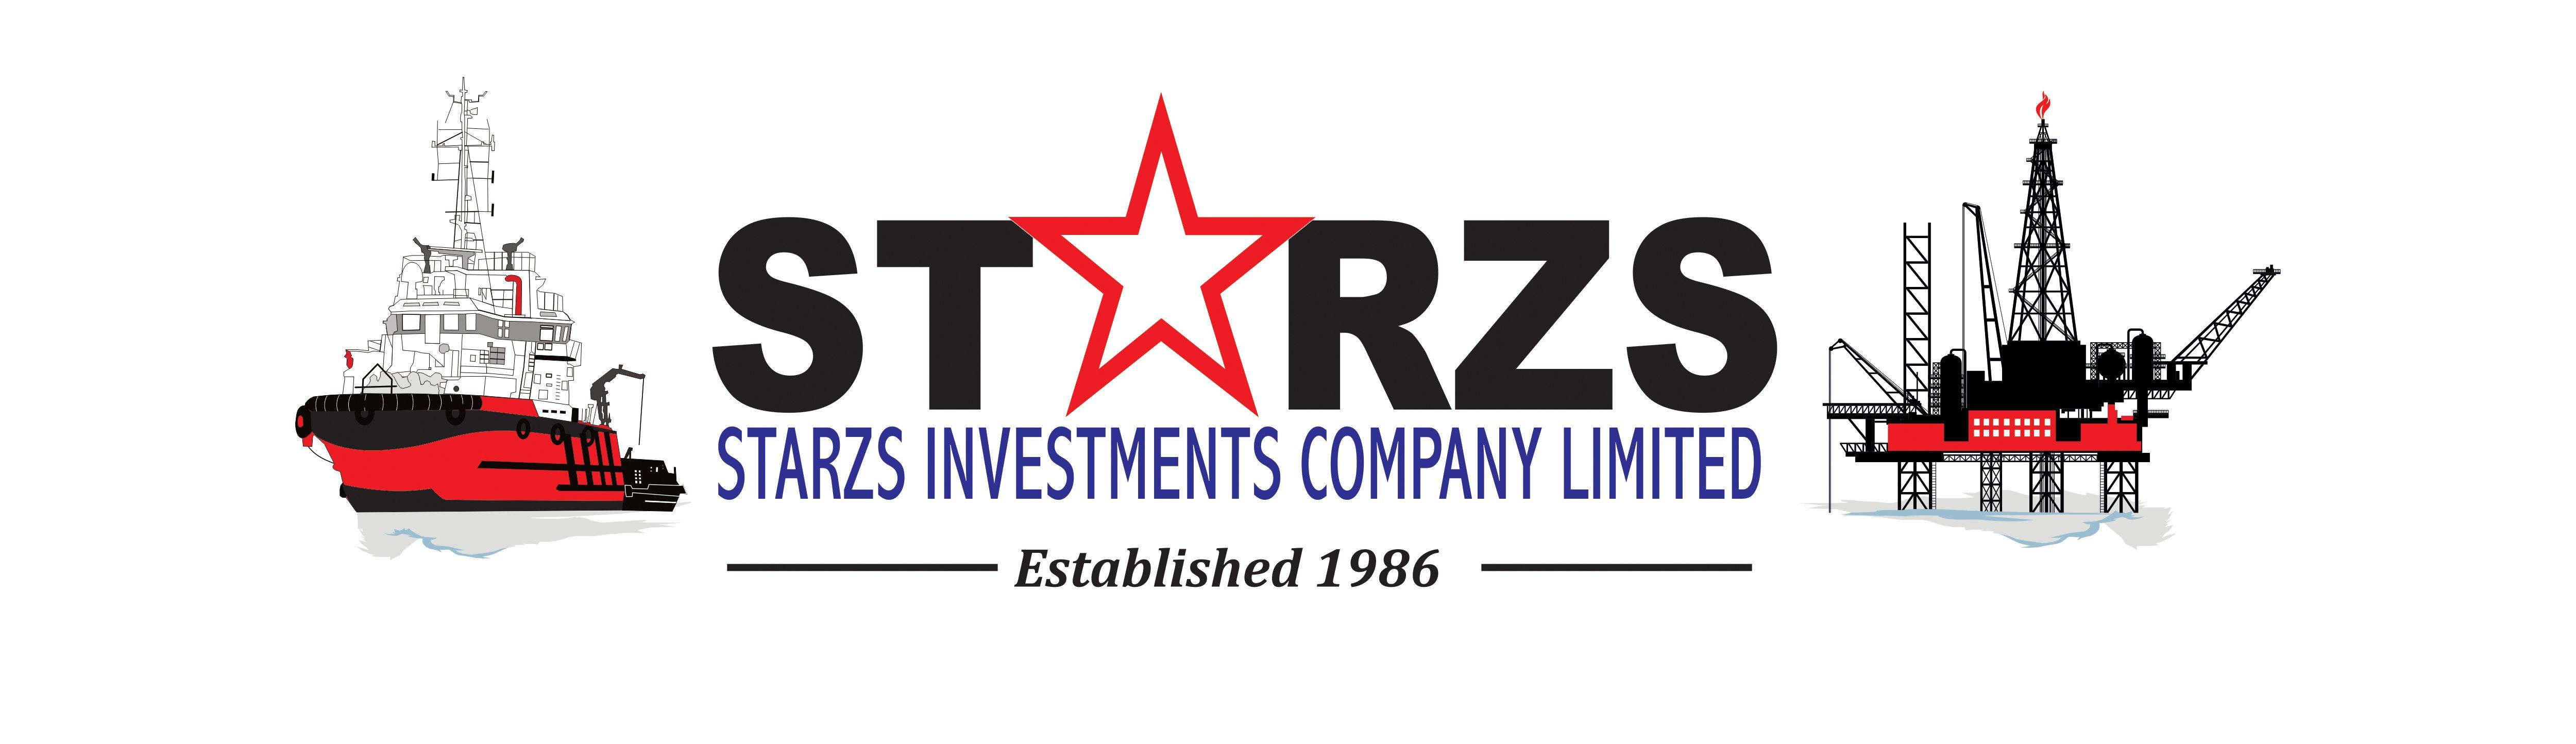 U. S. Invesments Company Logo - About Us - Starzs Investments Company Limited